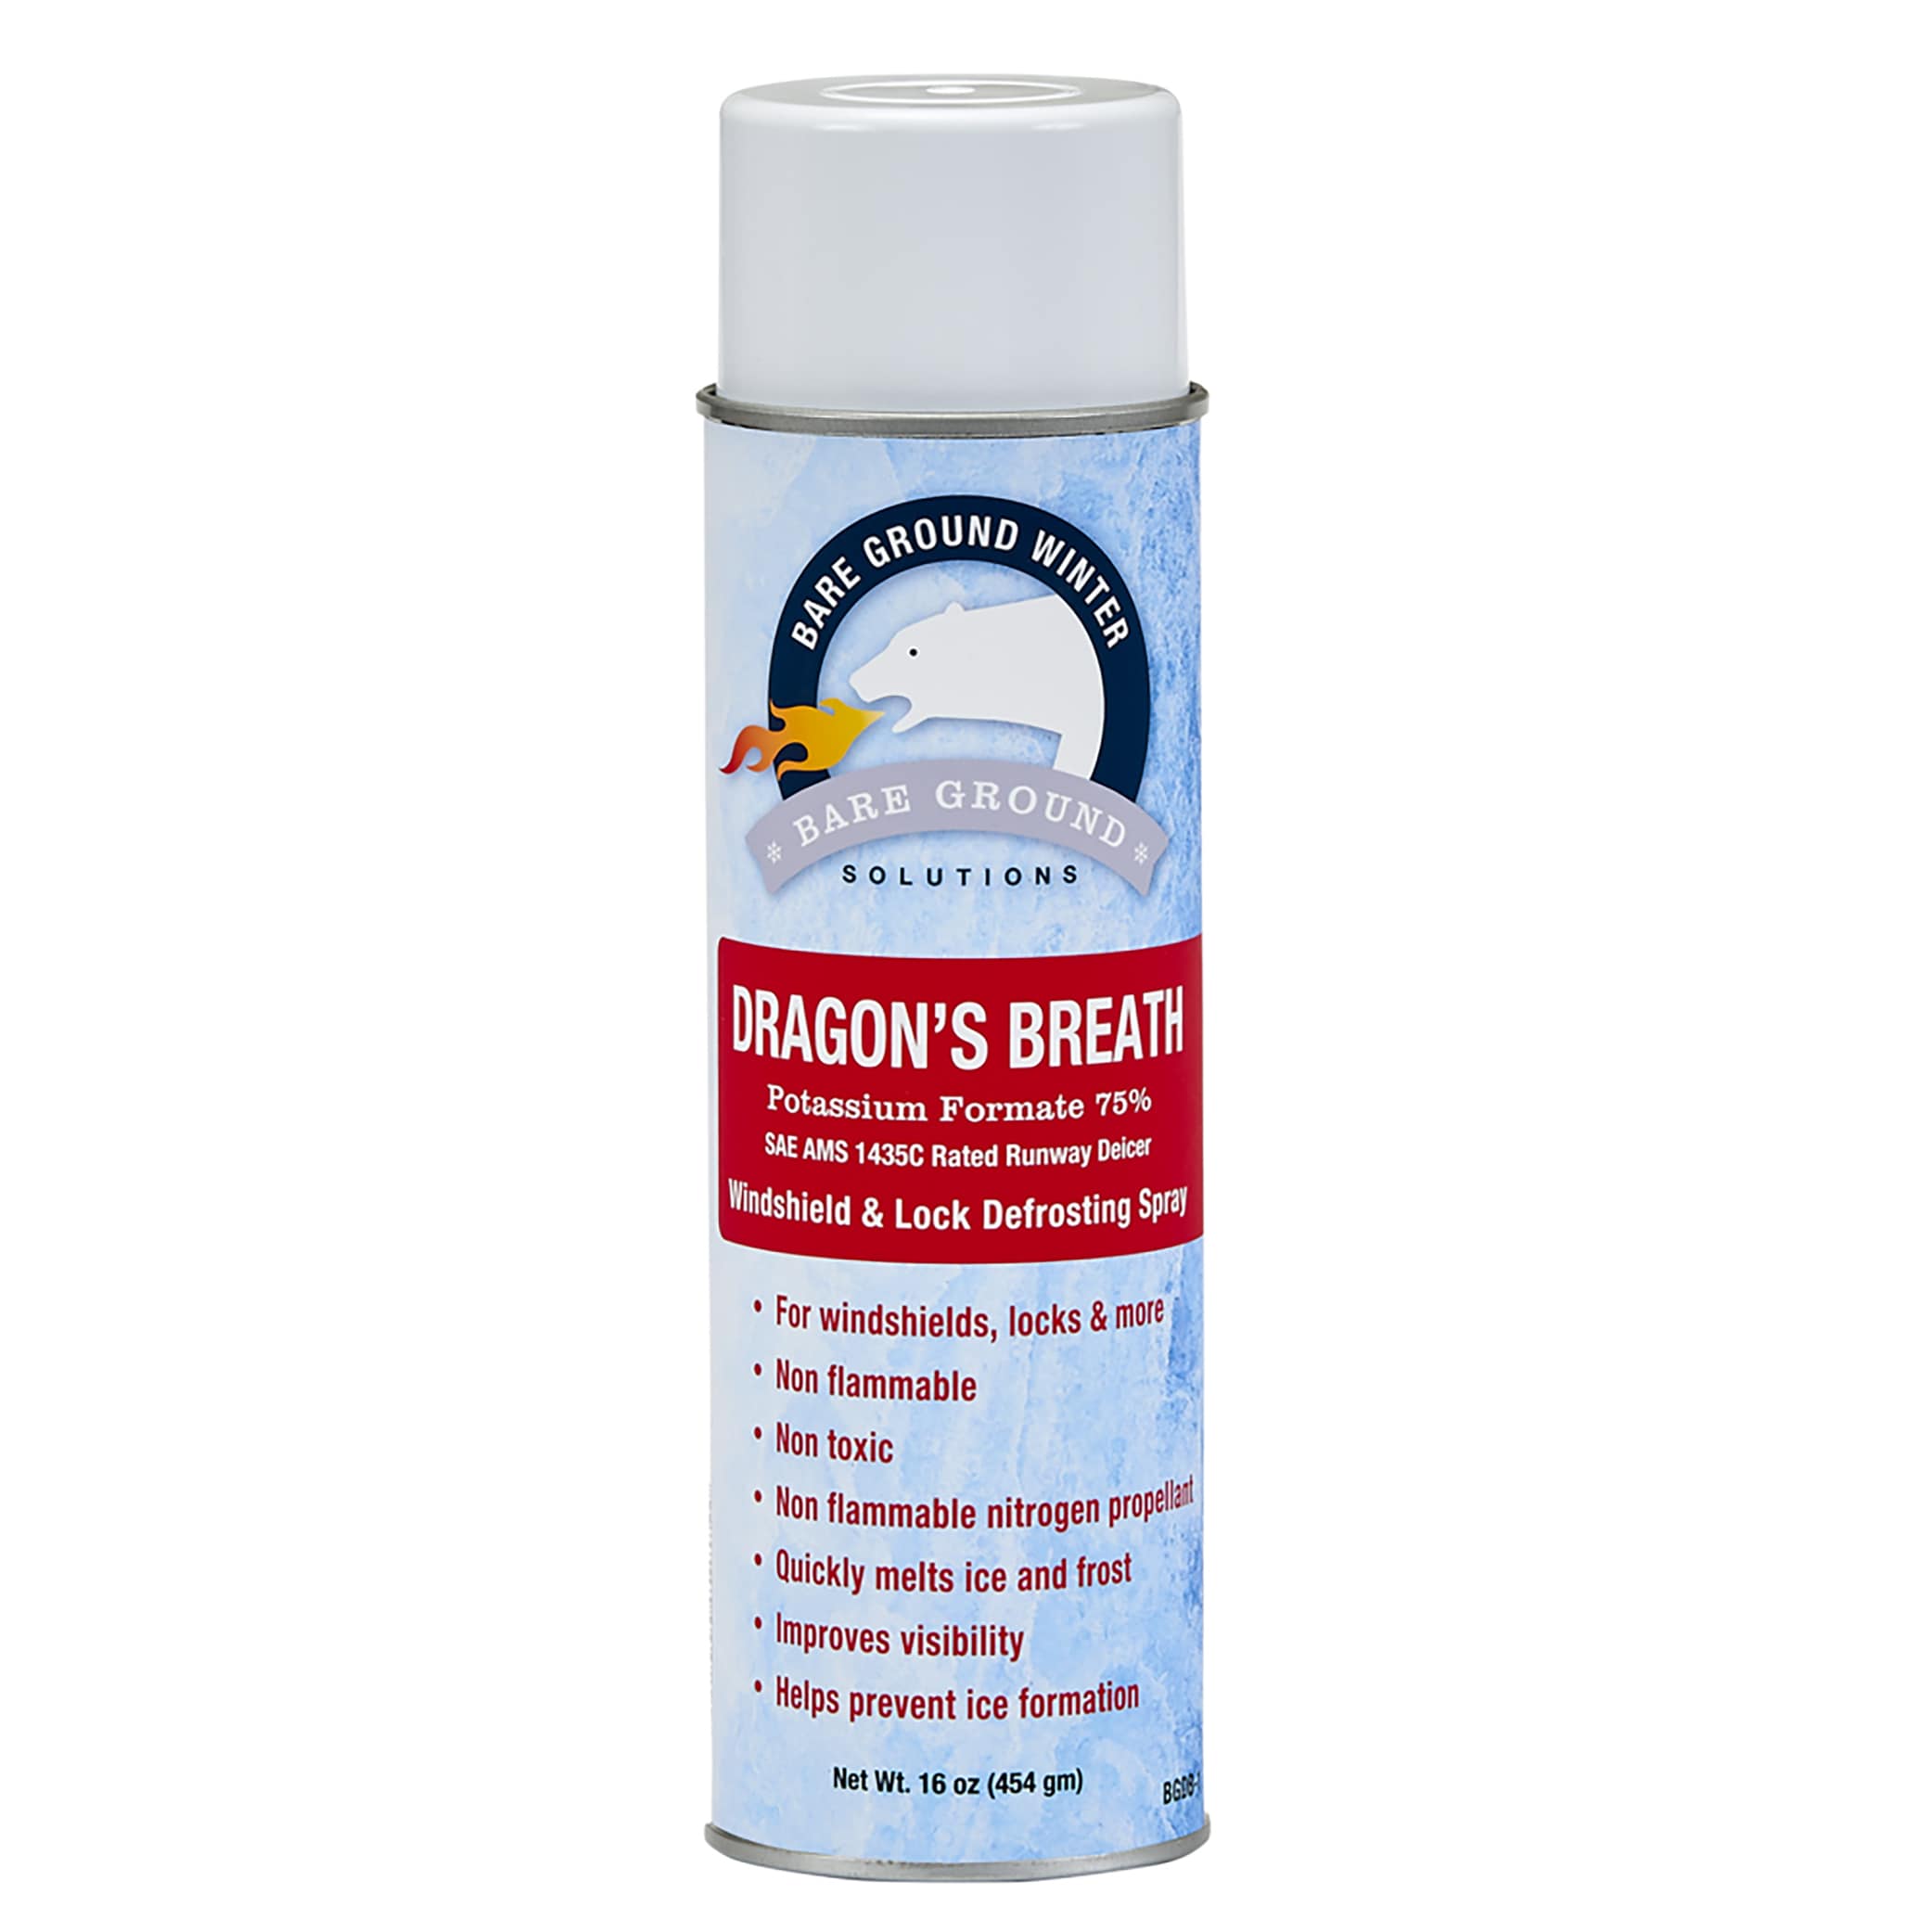 Bare Ground Natural Spray-On De-Icer, Prevents Re-Freezing, Trigger Spray, Quickly Melts Ice & Frost, For Windshields, Locks & More